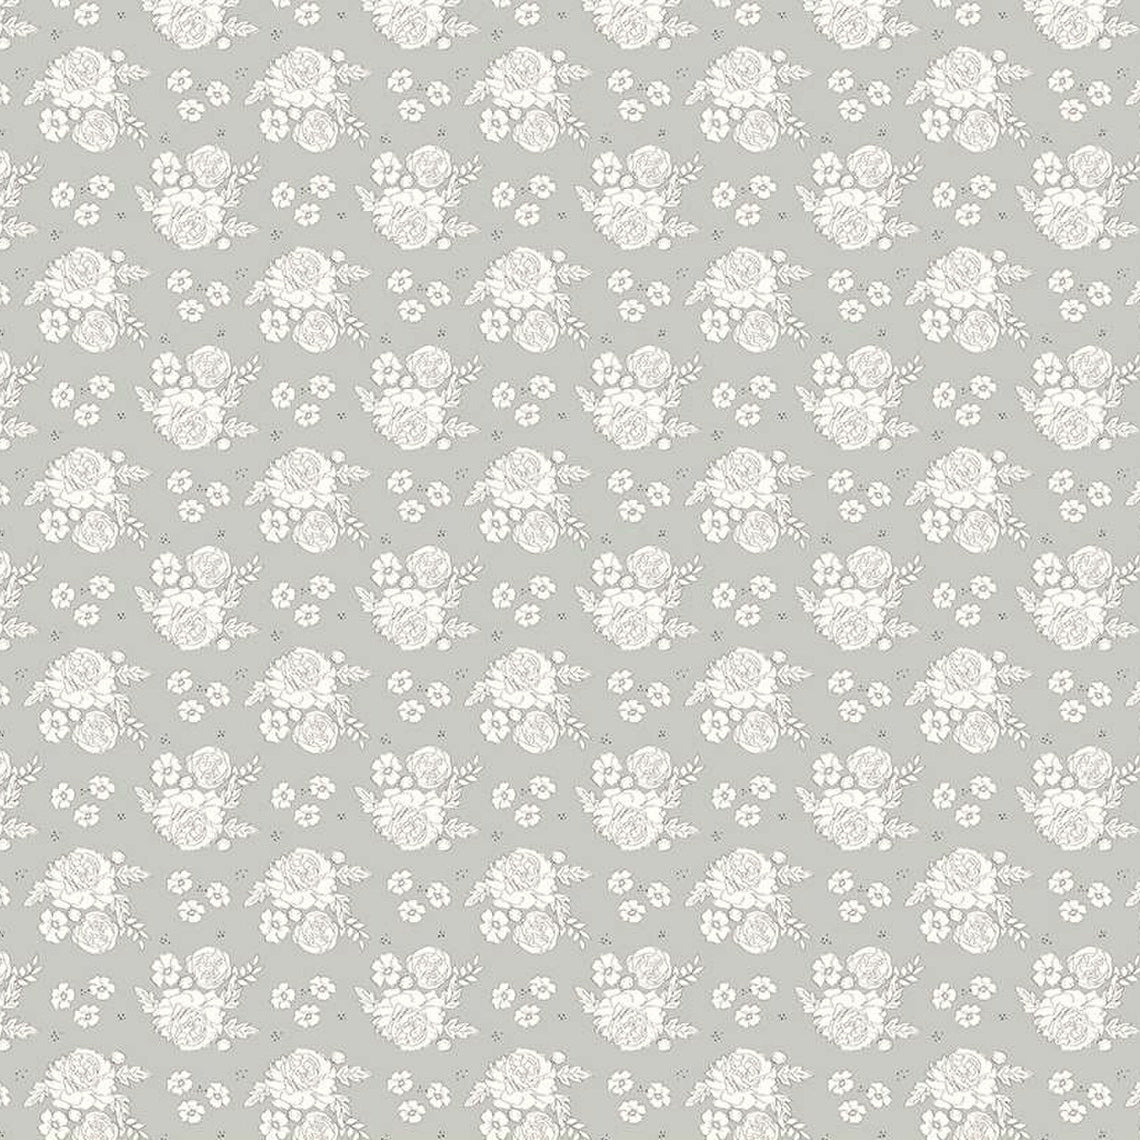 BloomBerry Gray Petite Flowers Fabric